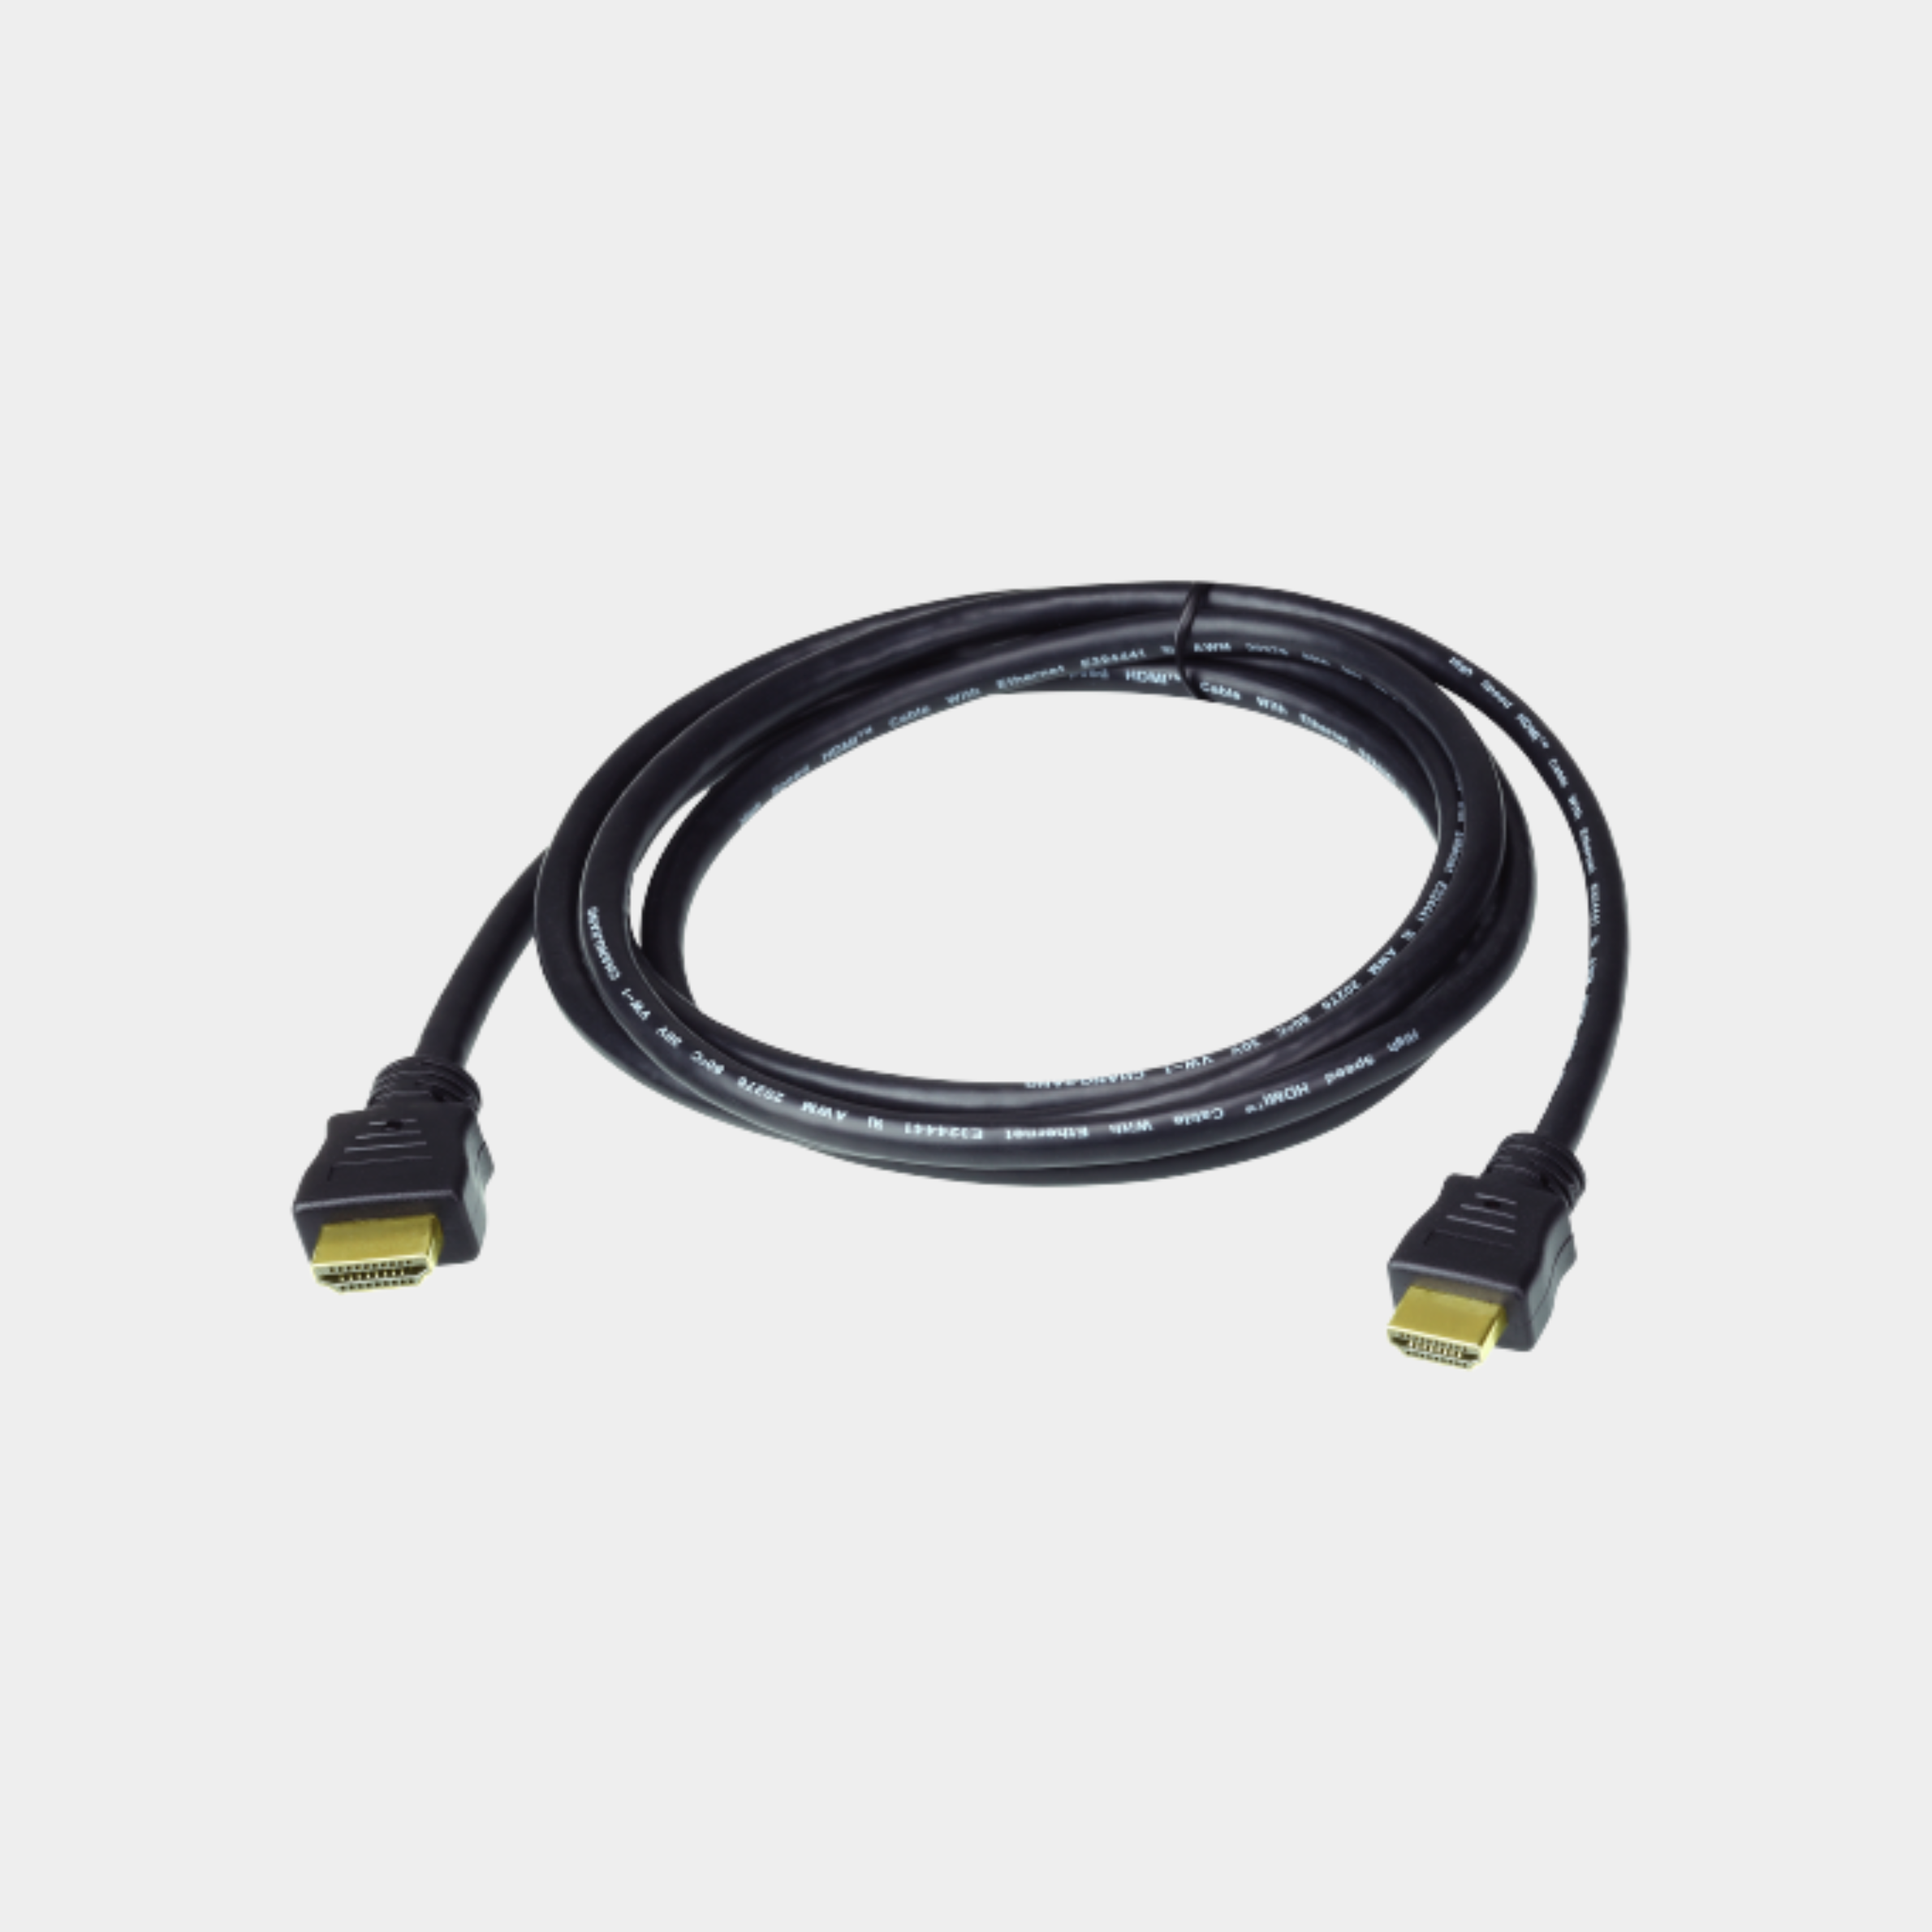 Aten 5m High Speed HDMI Cable with Ethernet(ATEN 2L-7D05H)